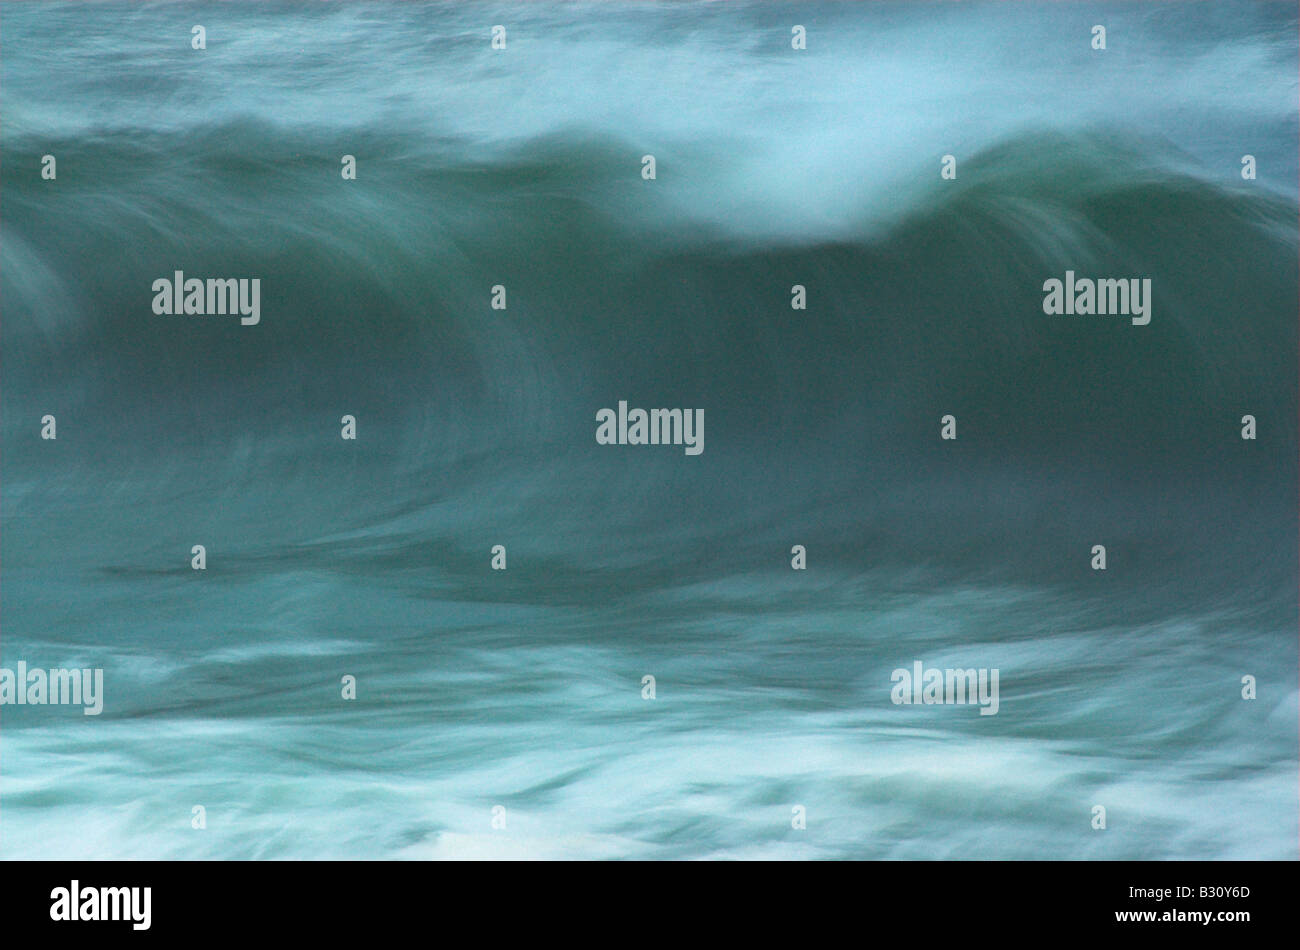 A wave breaking Stock Photo